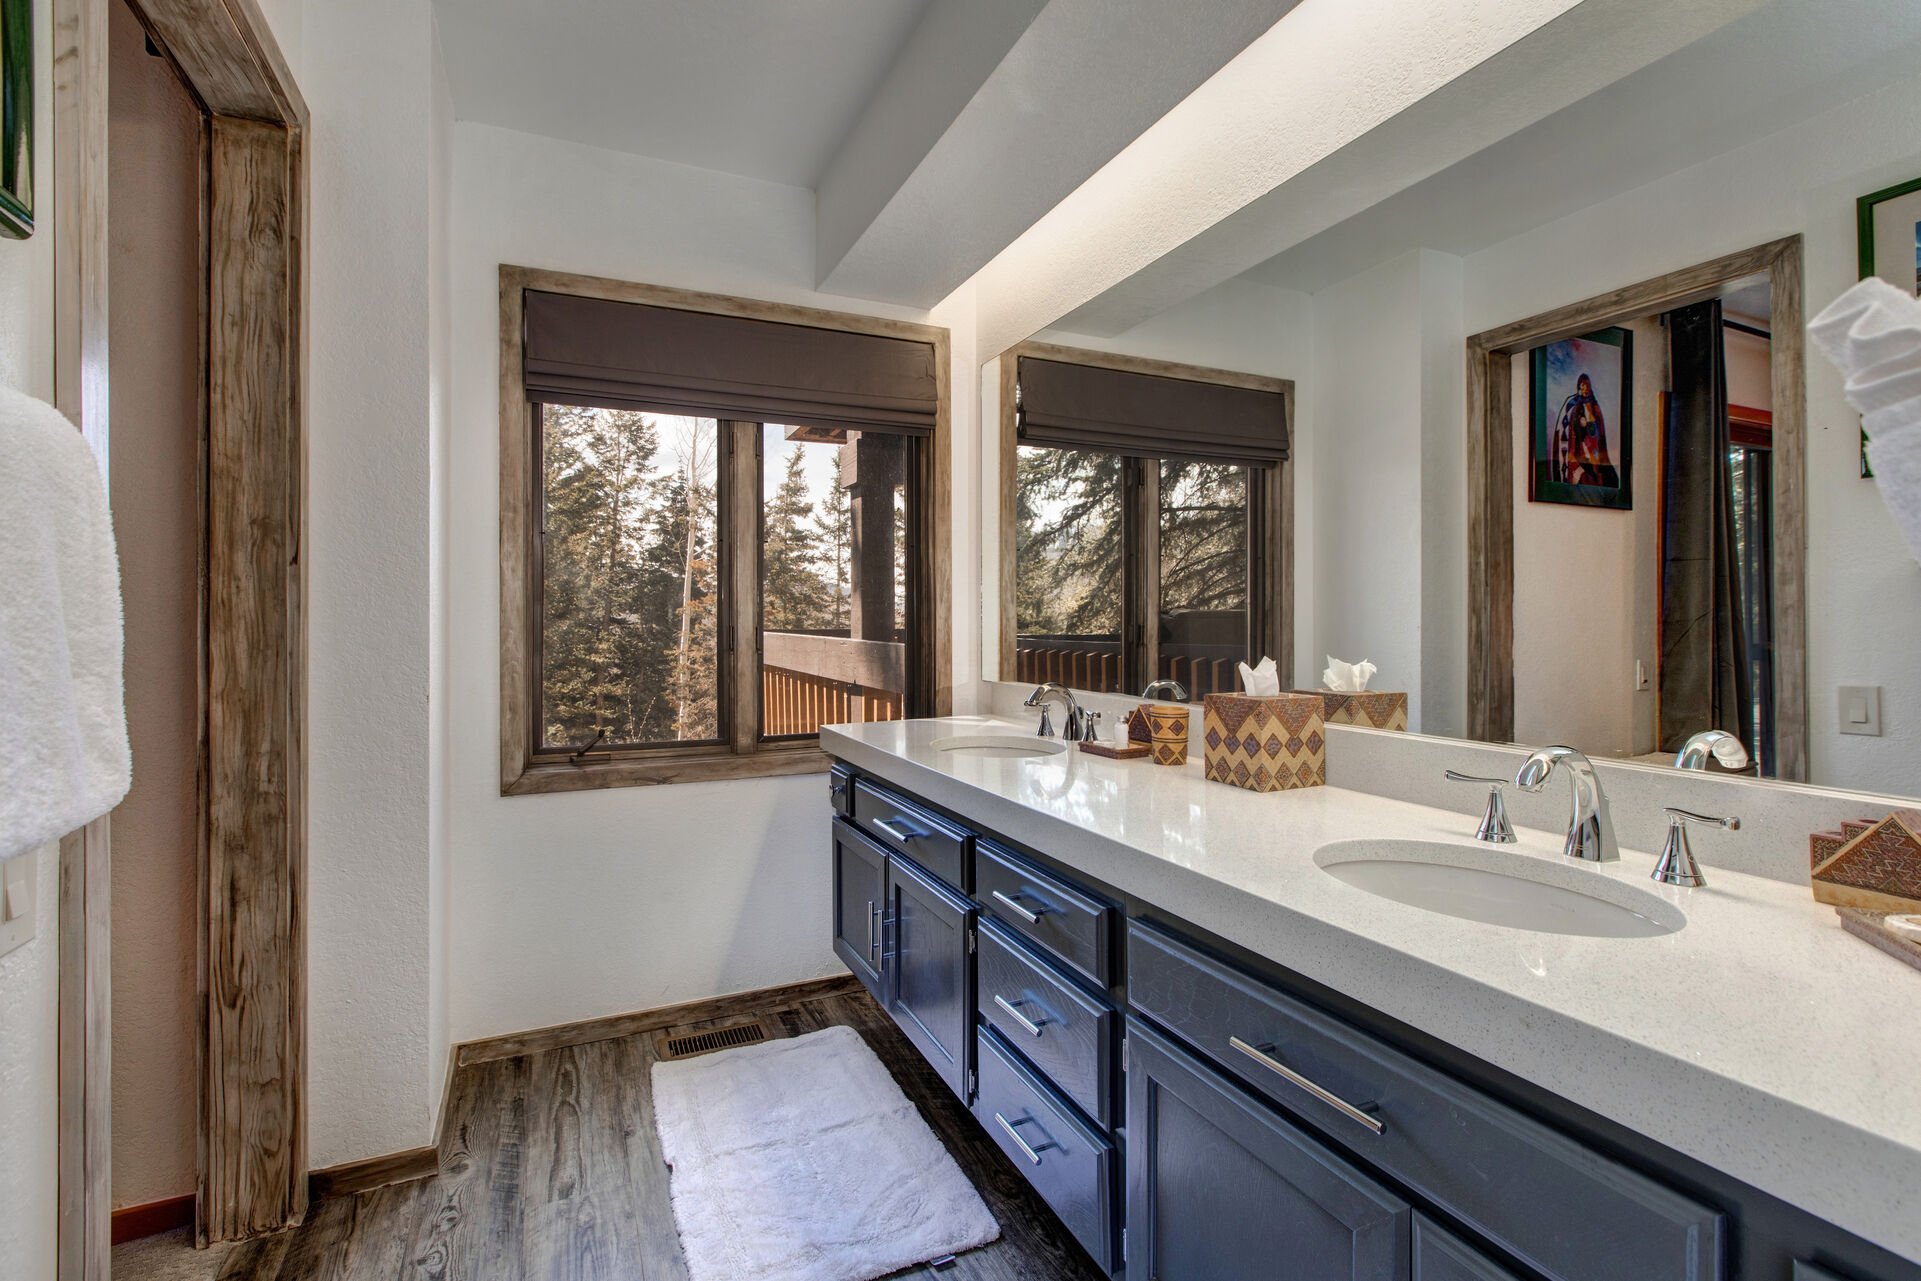 Master Bathroom with dual vanities, separate washroom and large tiled shower